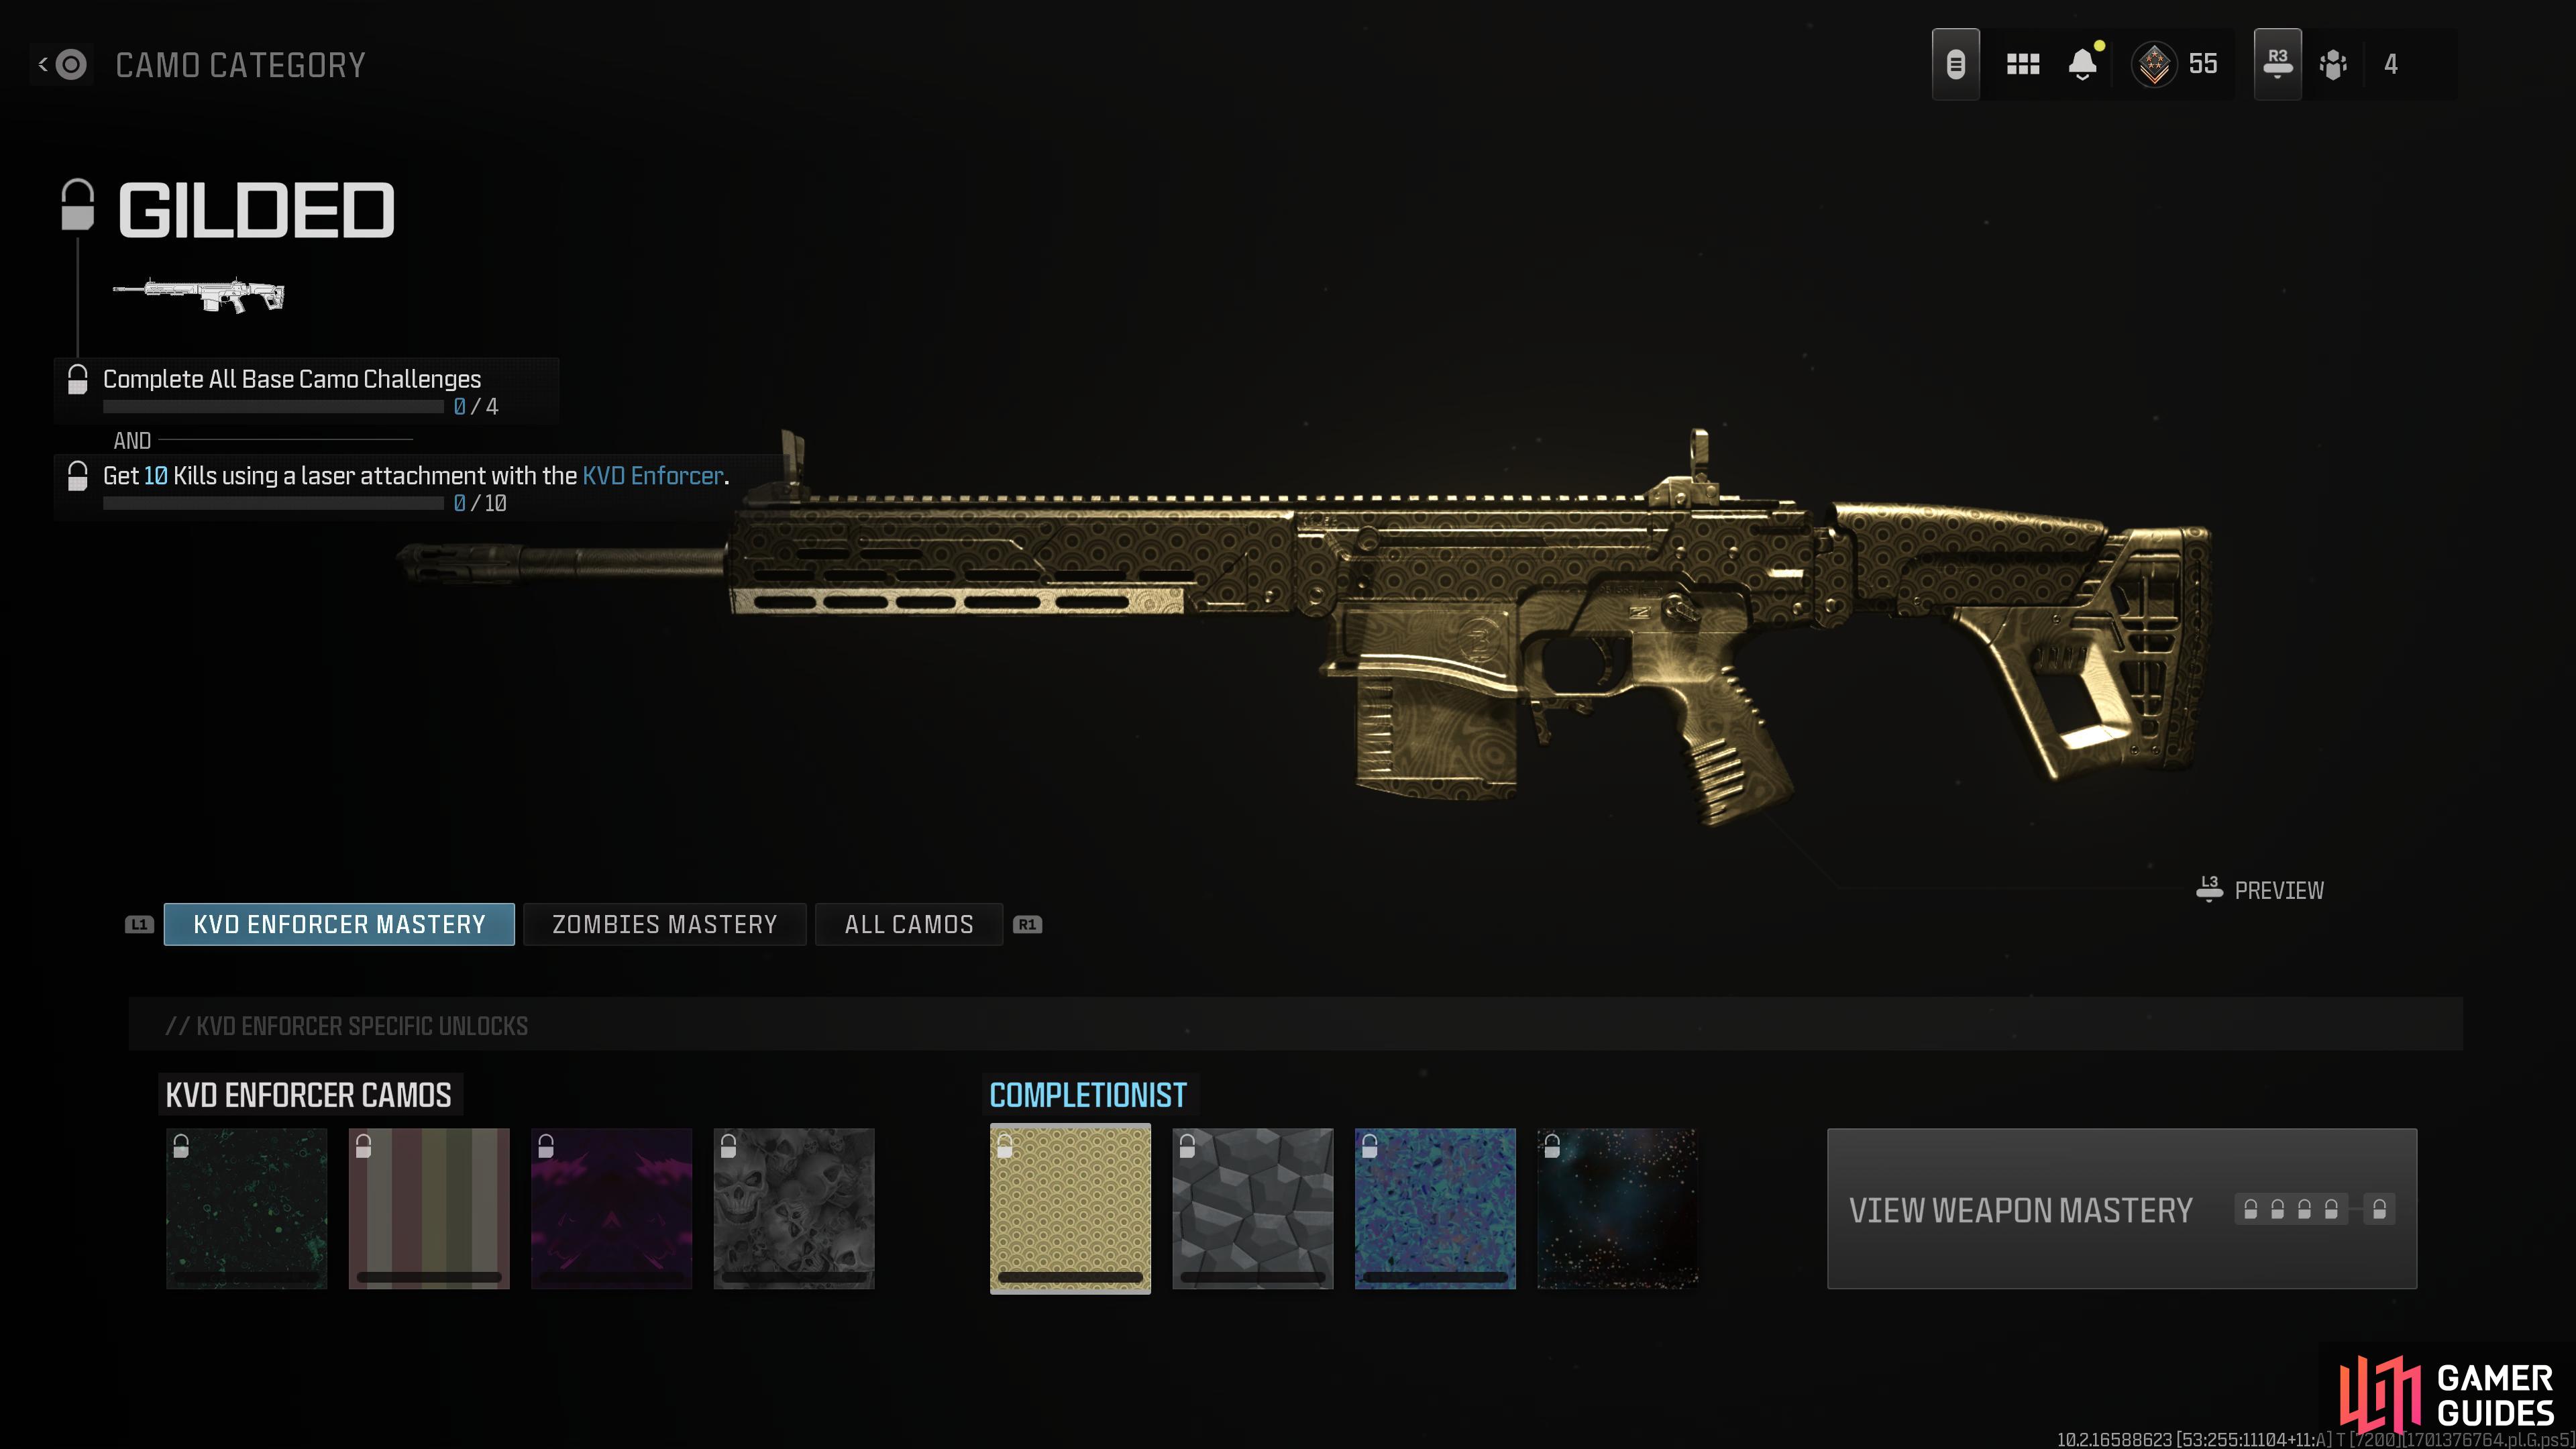 The KVD Enforcer is a Marksman Rifle that can be challenging to get all the Camos for.